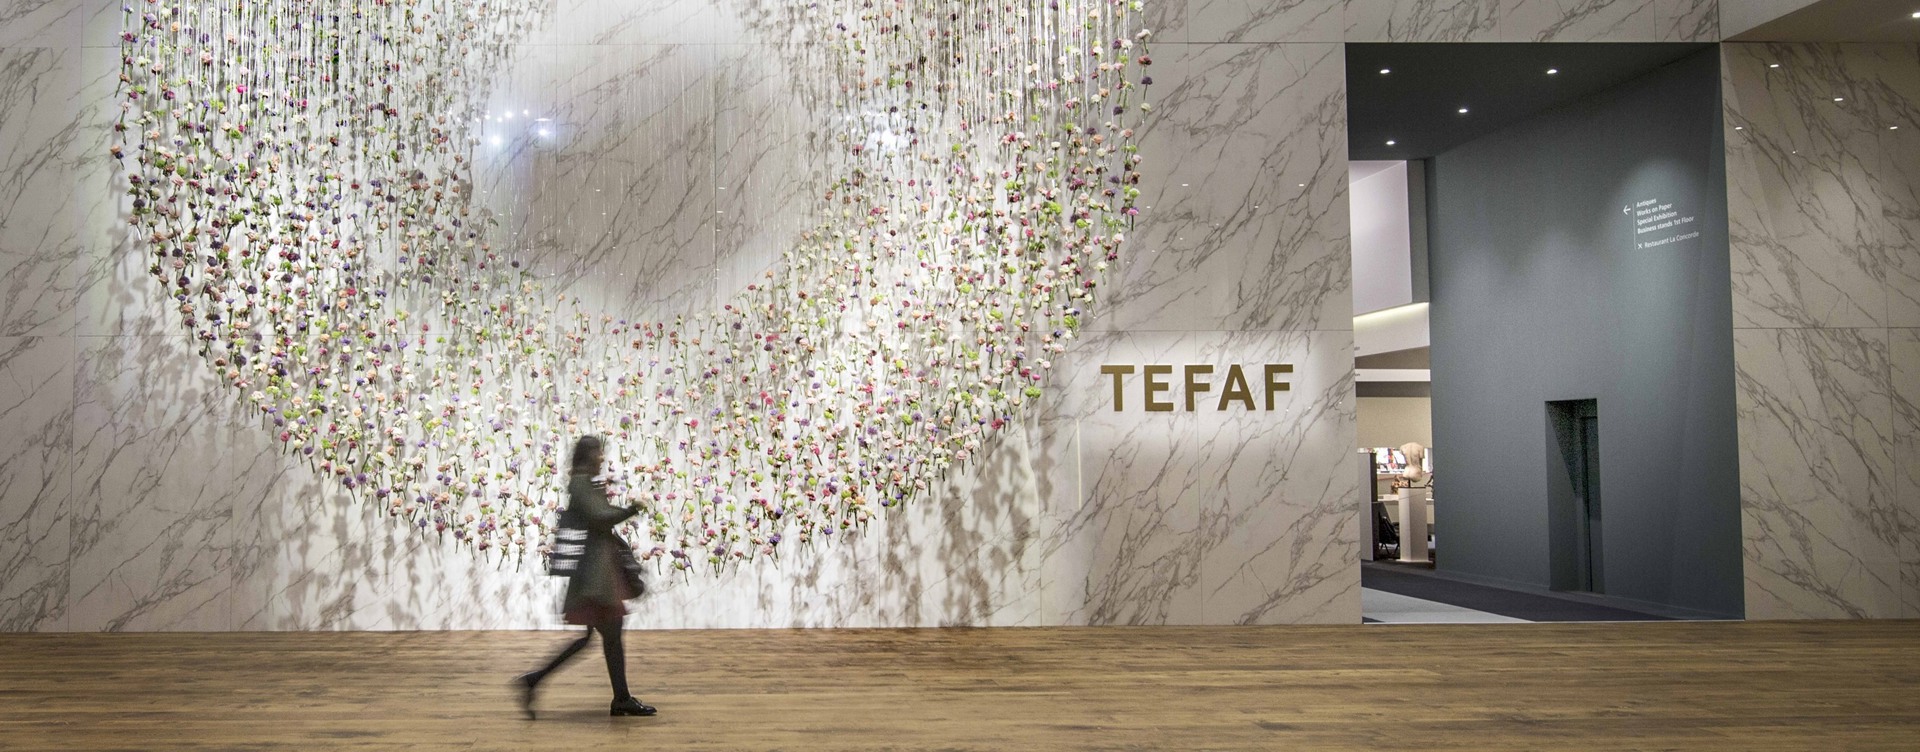 Visit TEFAF in Maastricht:
the most important art and antiques fair in Europe